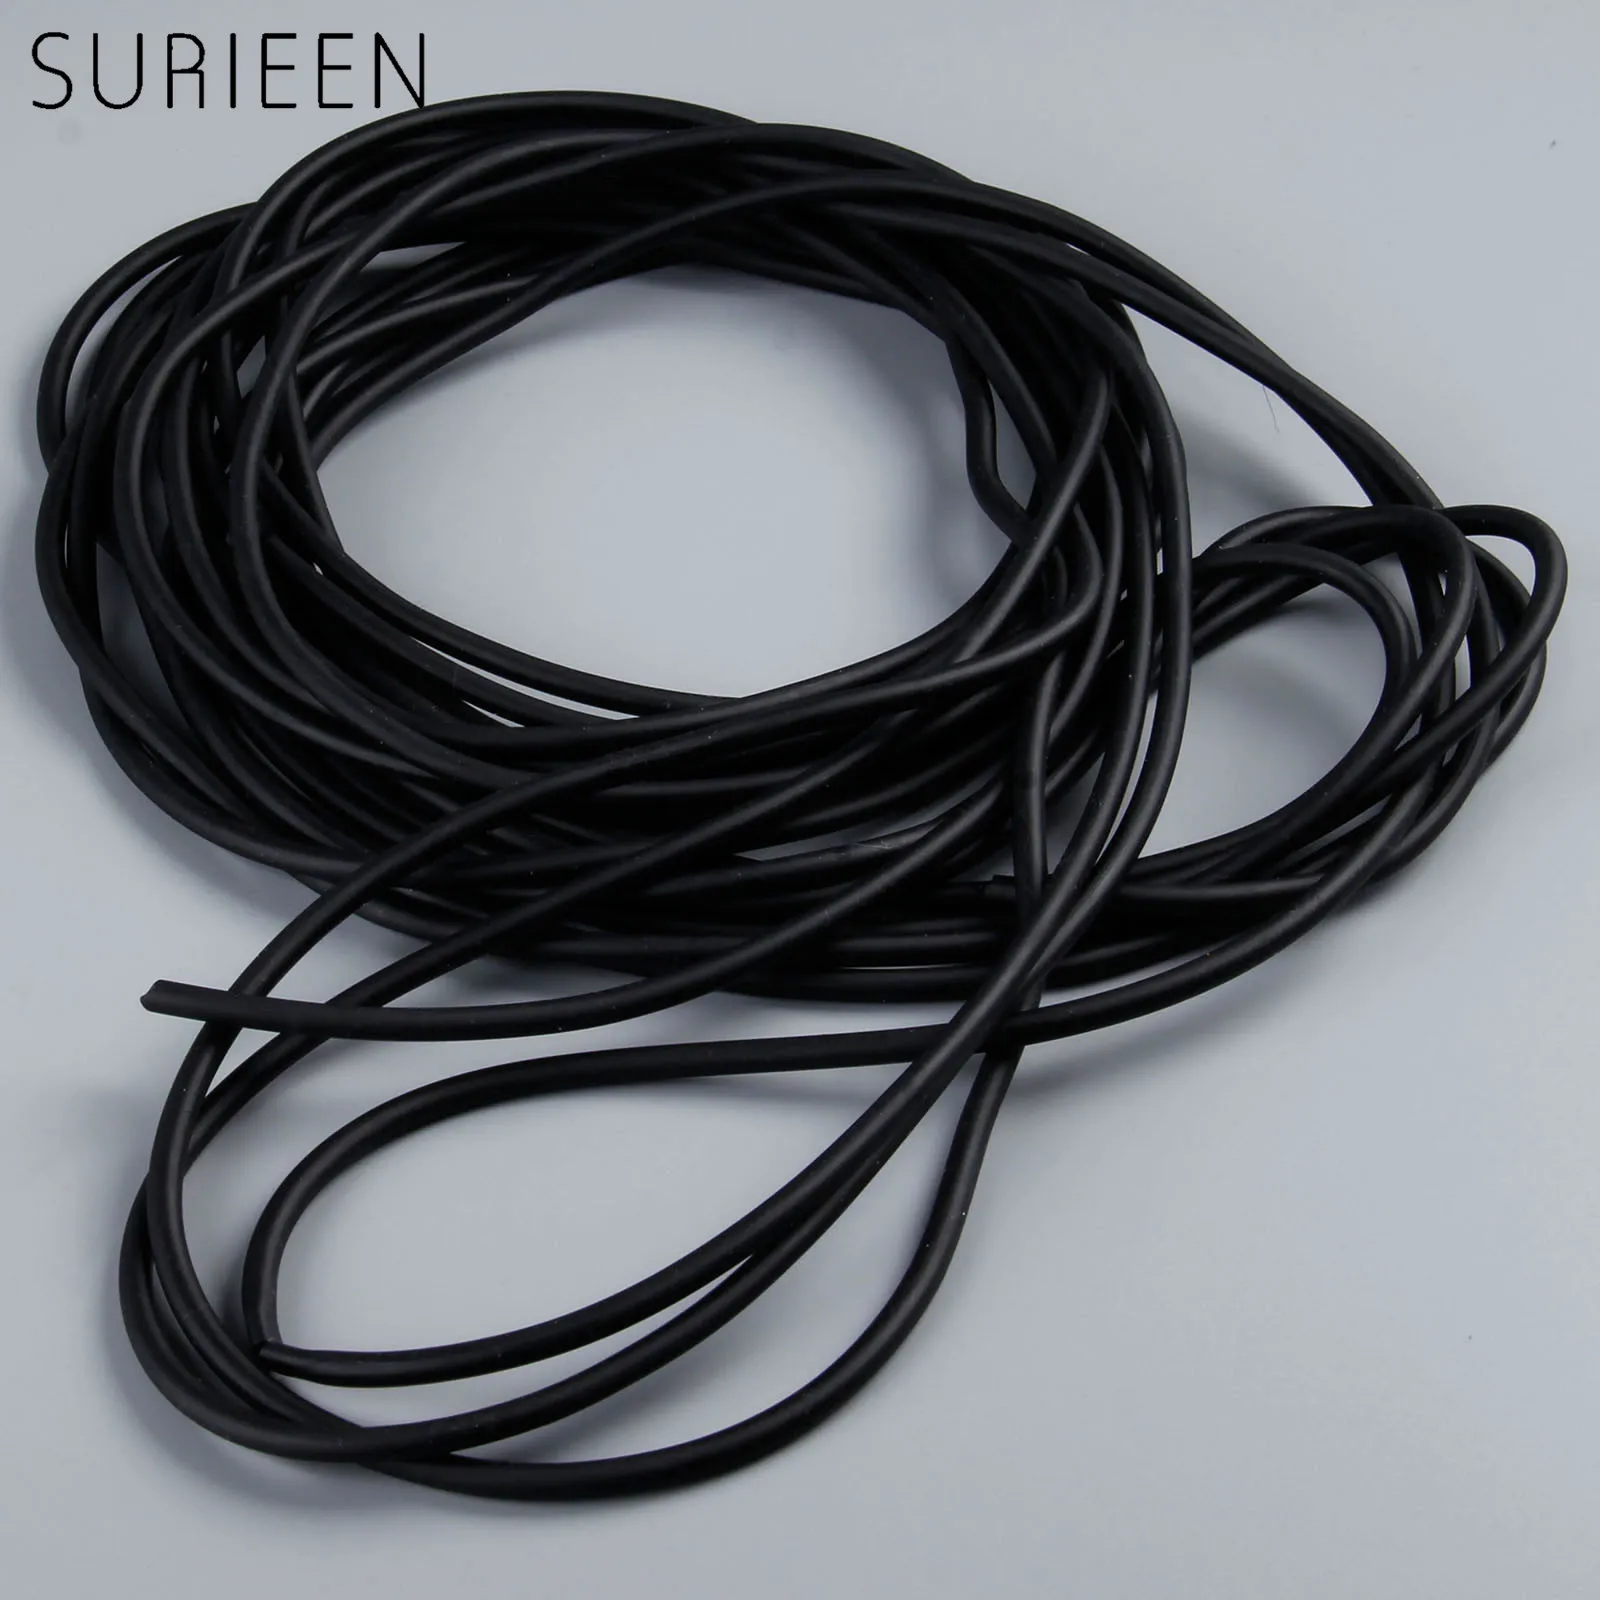 

NEW 10M 1.8mmx4.2mm Sport Strong Natural Latex Tube Slingshot Catapult Rubber Band Hunting Sling Shot Elastic Bungee Tubes 1842